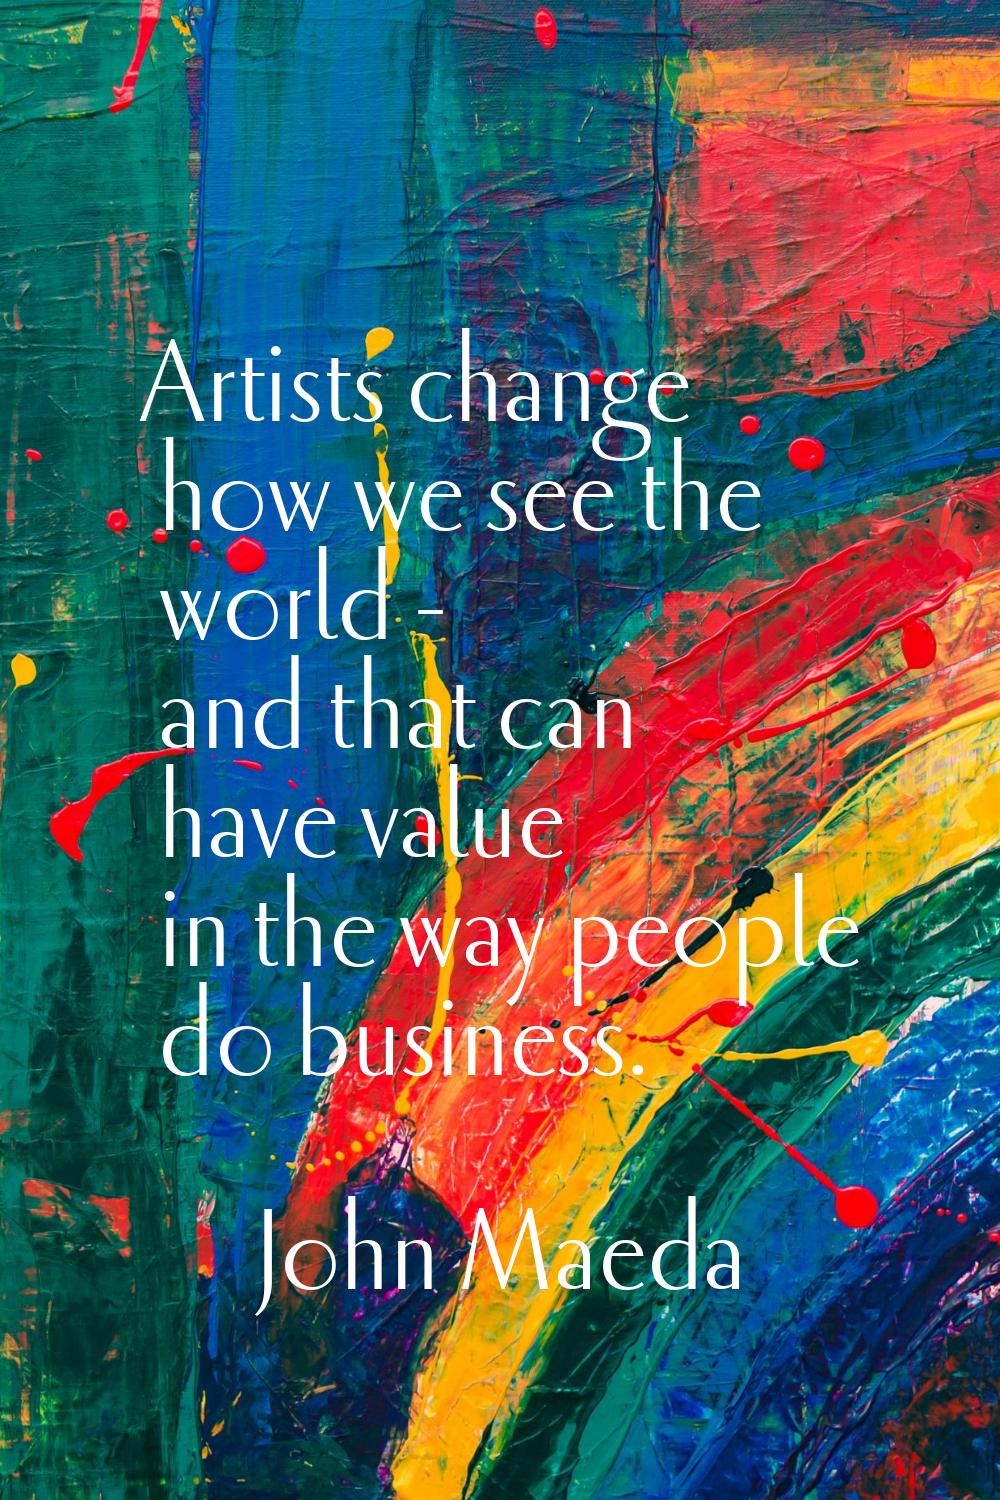 Artists change how we see the world - and that can have value in the way people do business.